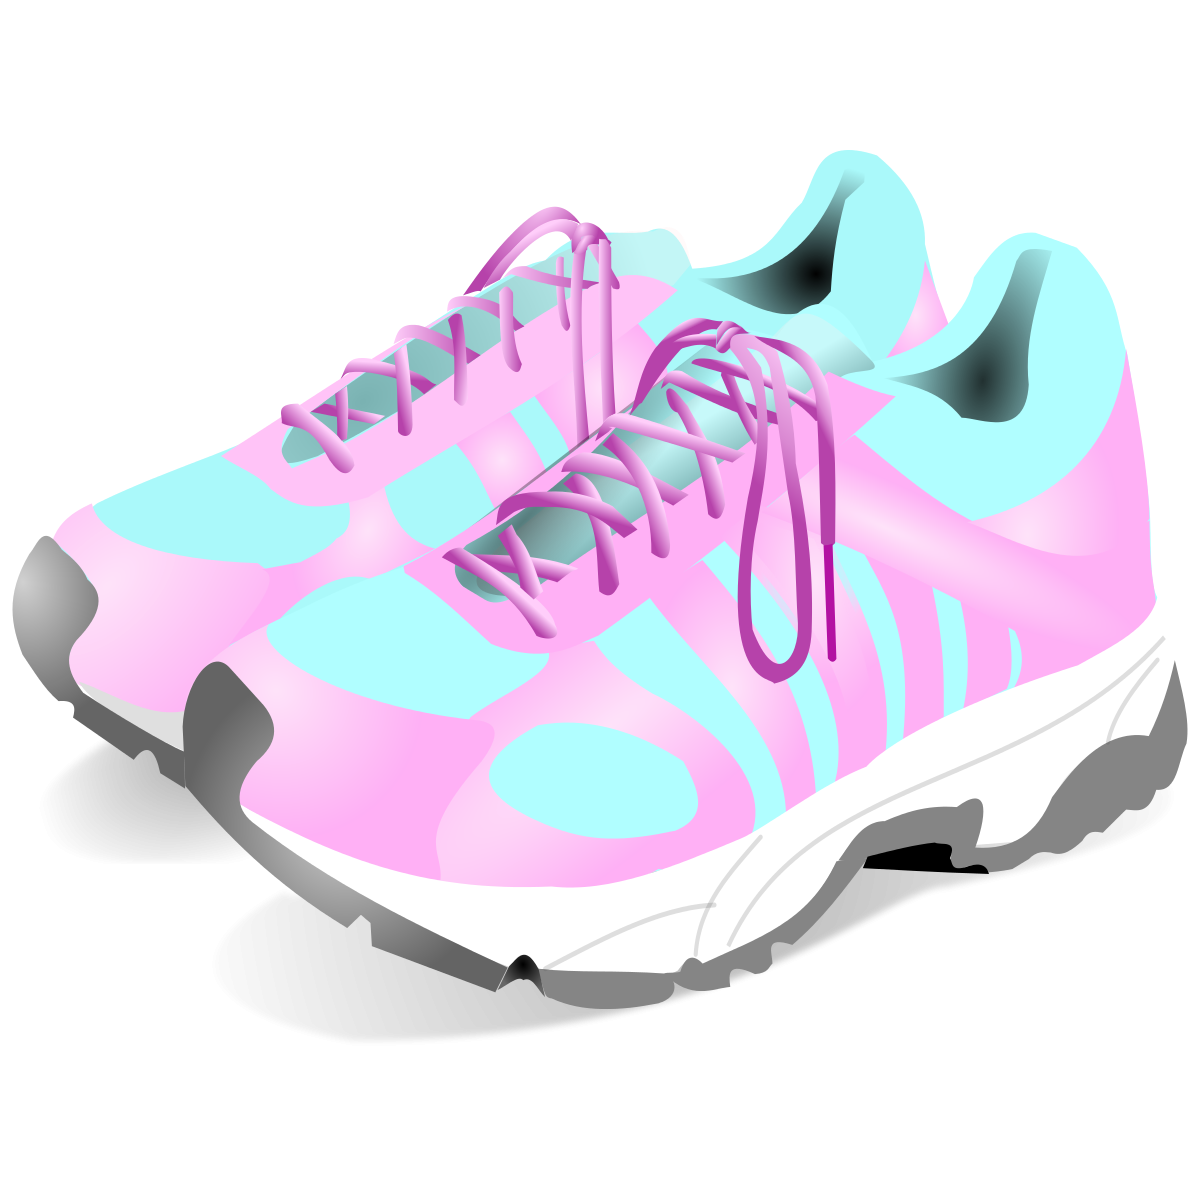 Sneakers Clipart by frankes : - Sneakers Clip Art